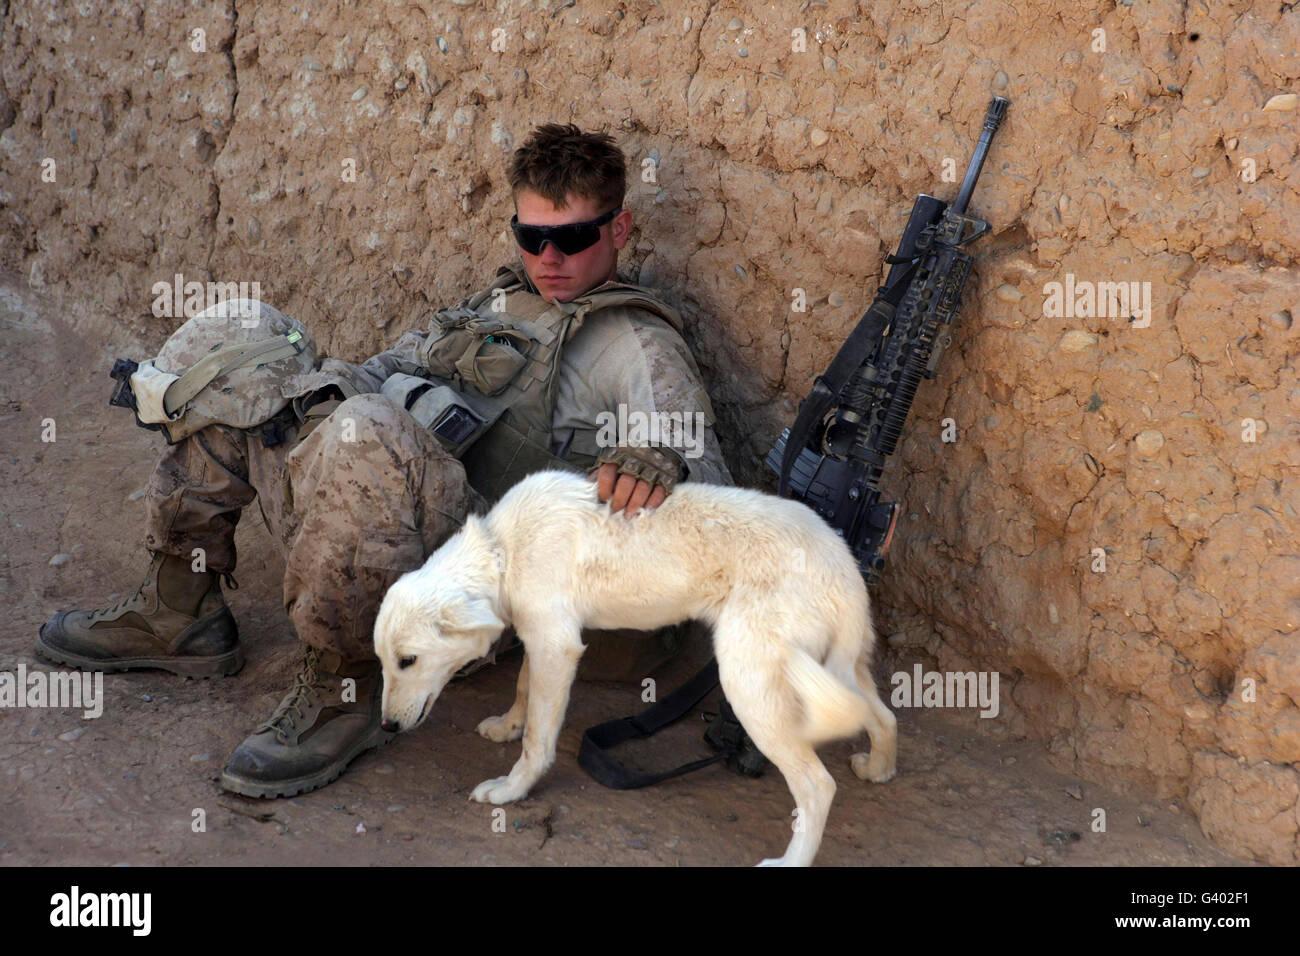 A U.S. Marine pets a dog while taking a break in Afghanistan. Stock Photo